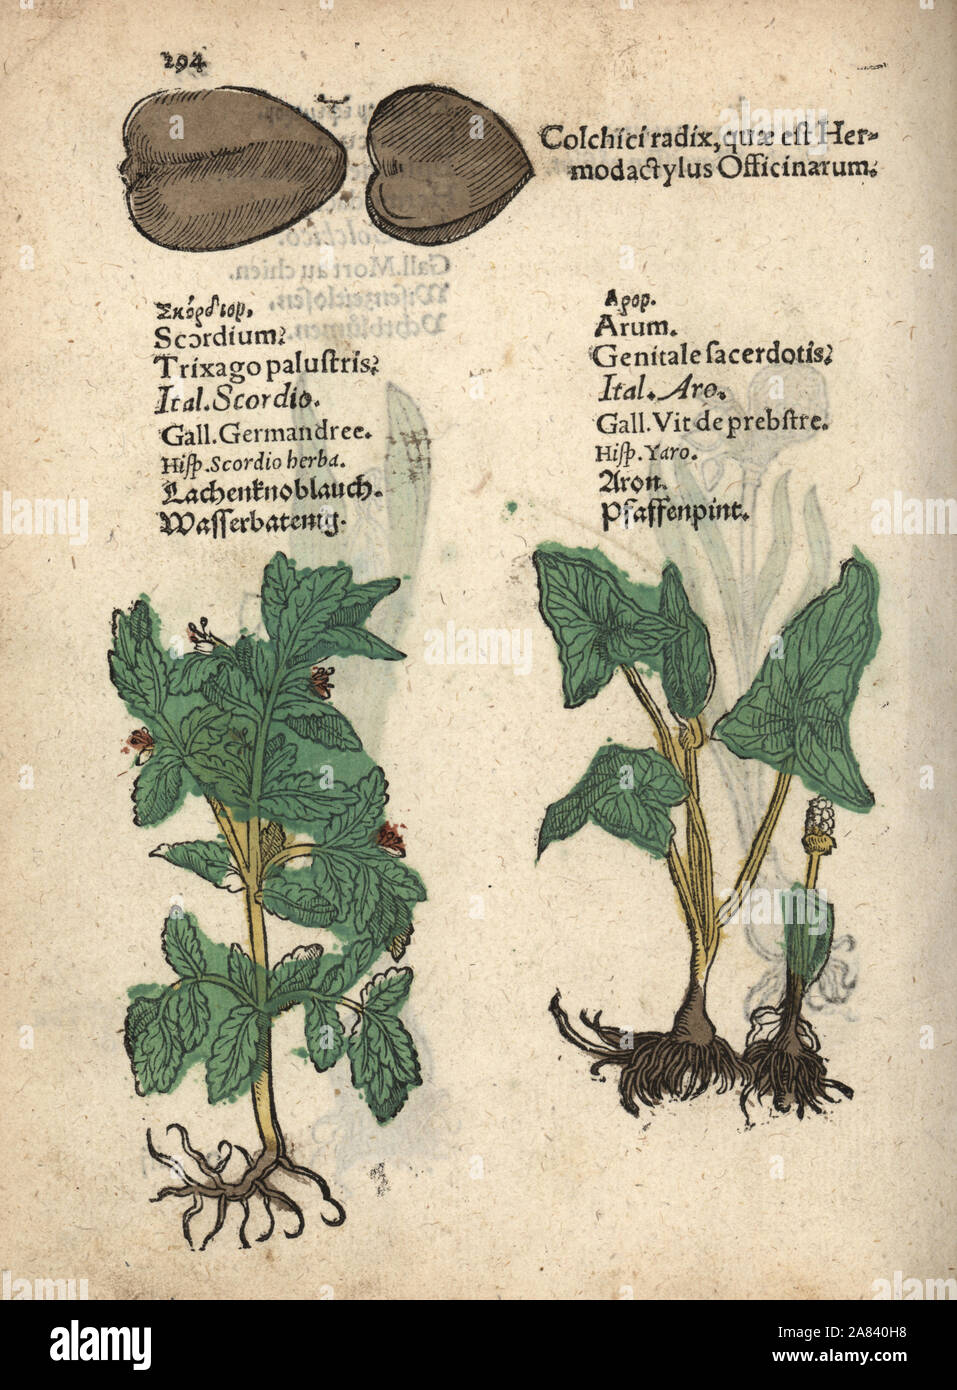 Water germander, Teucrium scordium, arum, Arum maculatum, and seed of Iris tuberosa. Handcoloured woodblock engraving of a botanical illustration from Adam Lonicer's Krauterbuch, or Herbal, Frankfurt, 1557. This from a 17th century pirate edition or atlas of illustrations only, with captions in Latin, Greek, French, Italian, German, and in English manuscript. Stock Photo